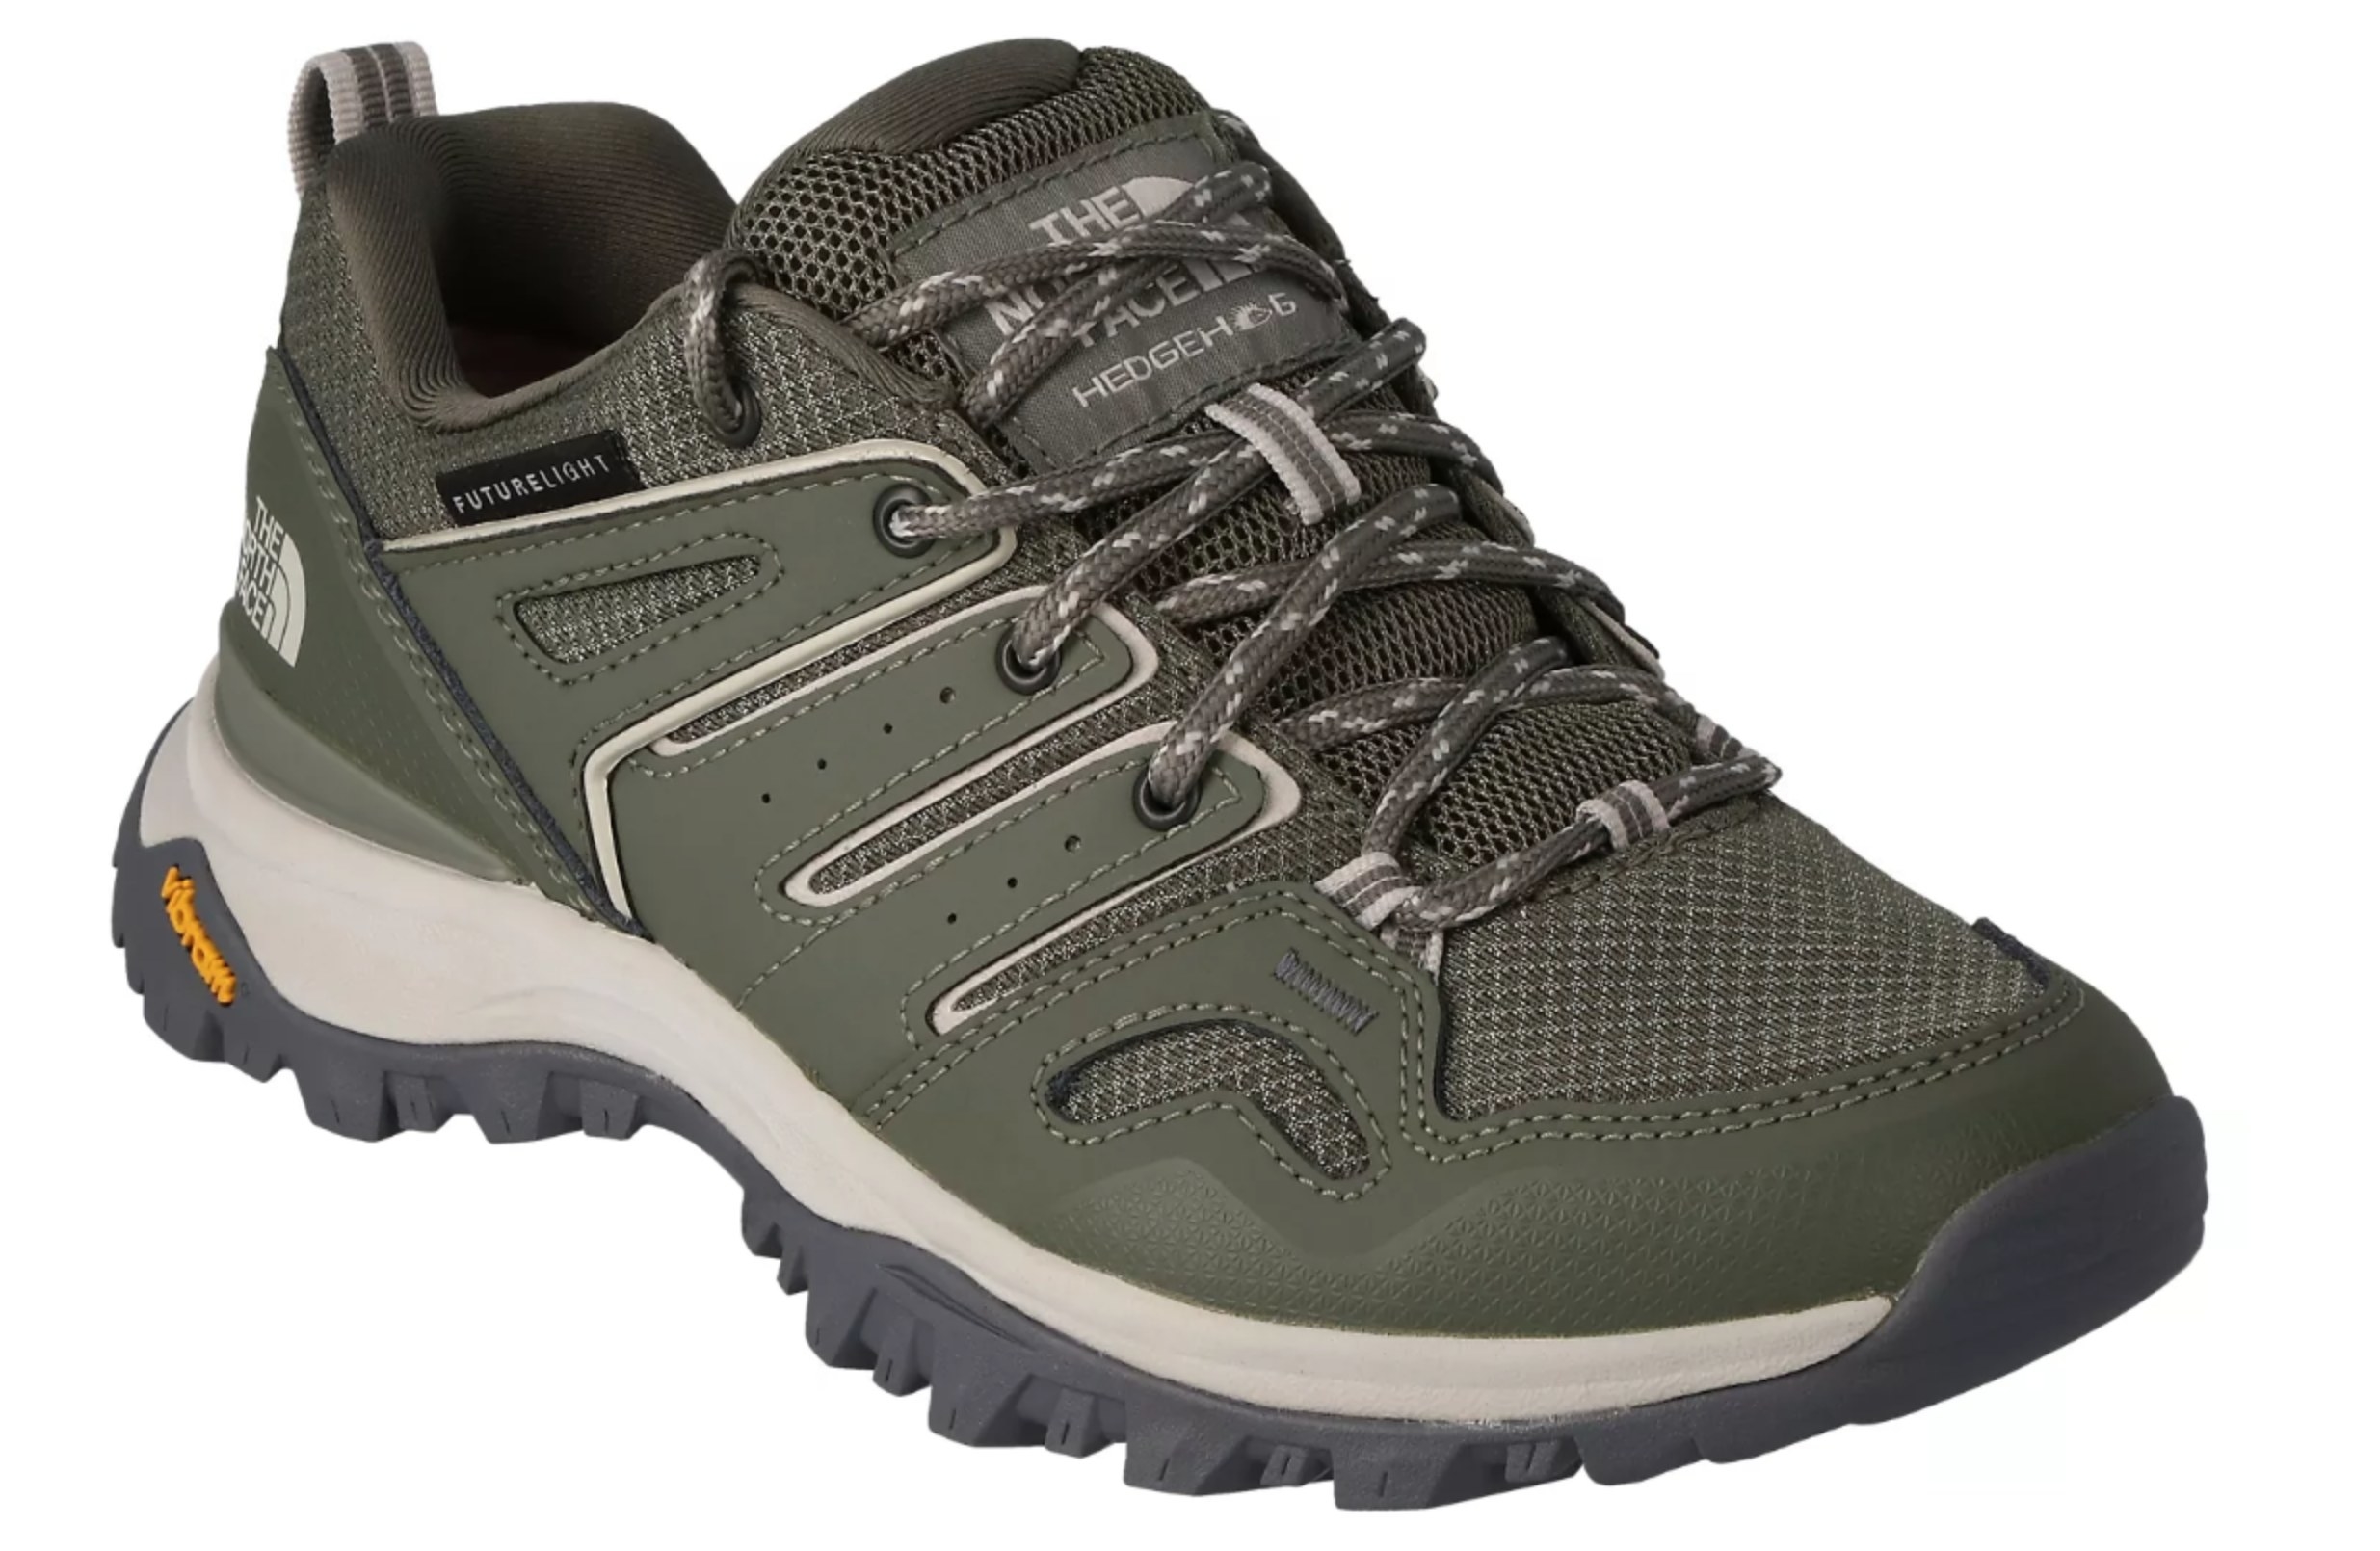 the North Face waterpoof hiking shoe in olive